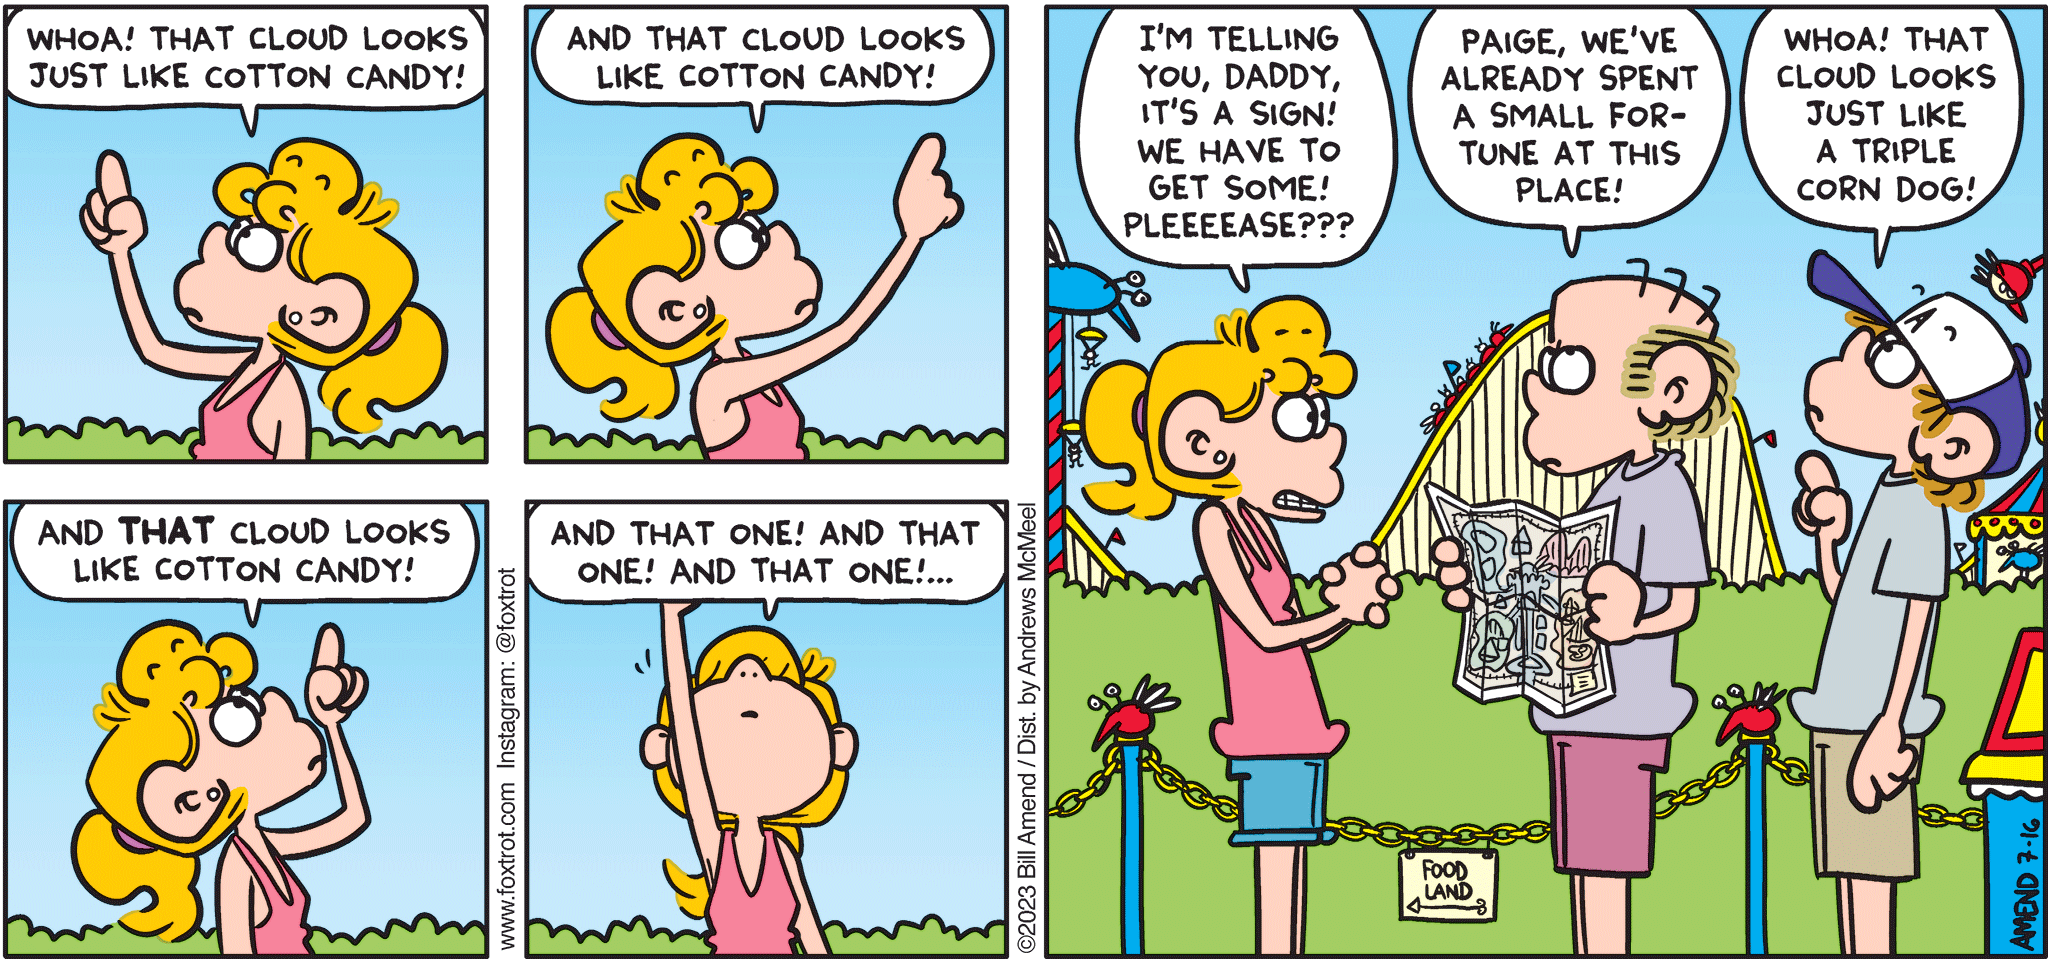 FoxTrot comic strip by Bill Amend - "Yumulus" published July 16, 2023 - Transcript: Paige Fox: Whoa! That cloud looks just like cotton candy! And that cloud looks like cotton candy! And THAT cloud looks like cotton candy! And that one! And that one! And that one!... I'm telling you, Daddy, it's a sign! We have to get some! Pleeease??? Roger Fox: Paige, we've already spent a small fortune at this place! Peter Fox: Whoa! That cloud looks just like a triple corn dog!